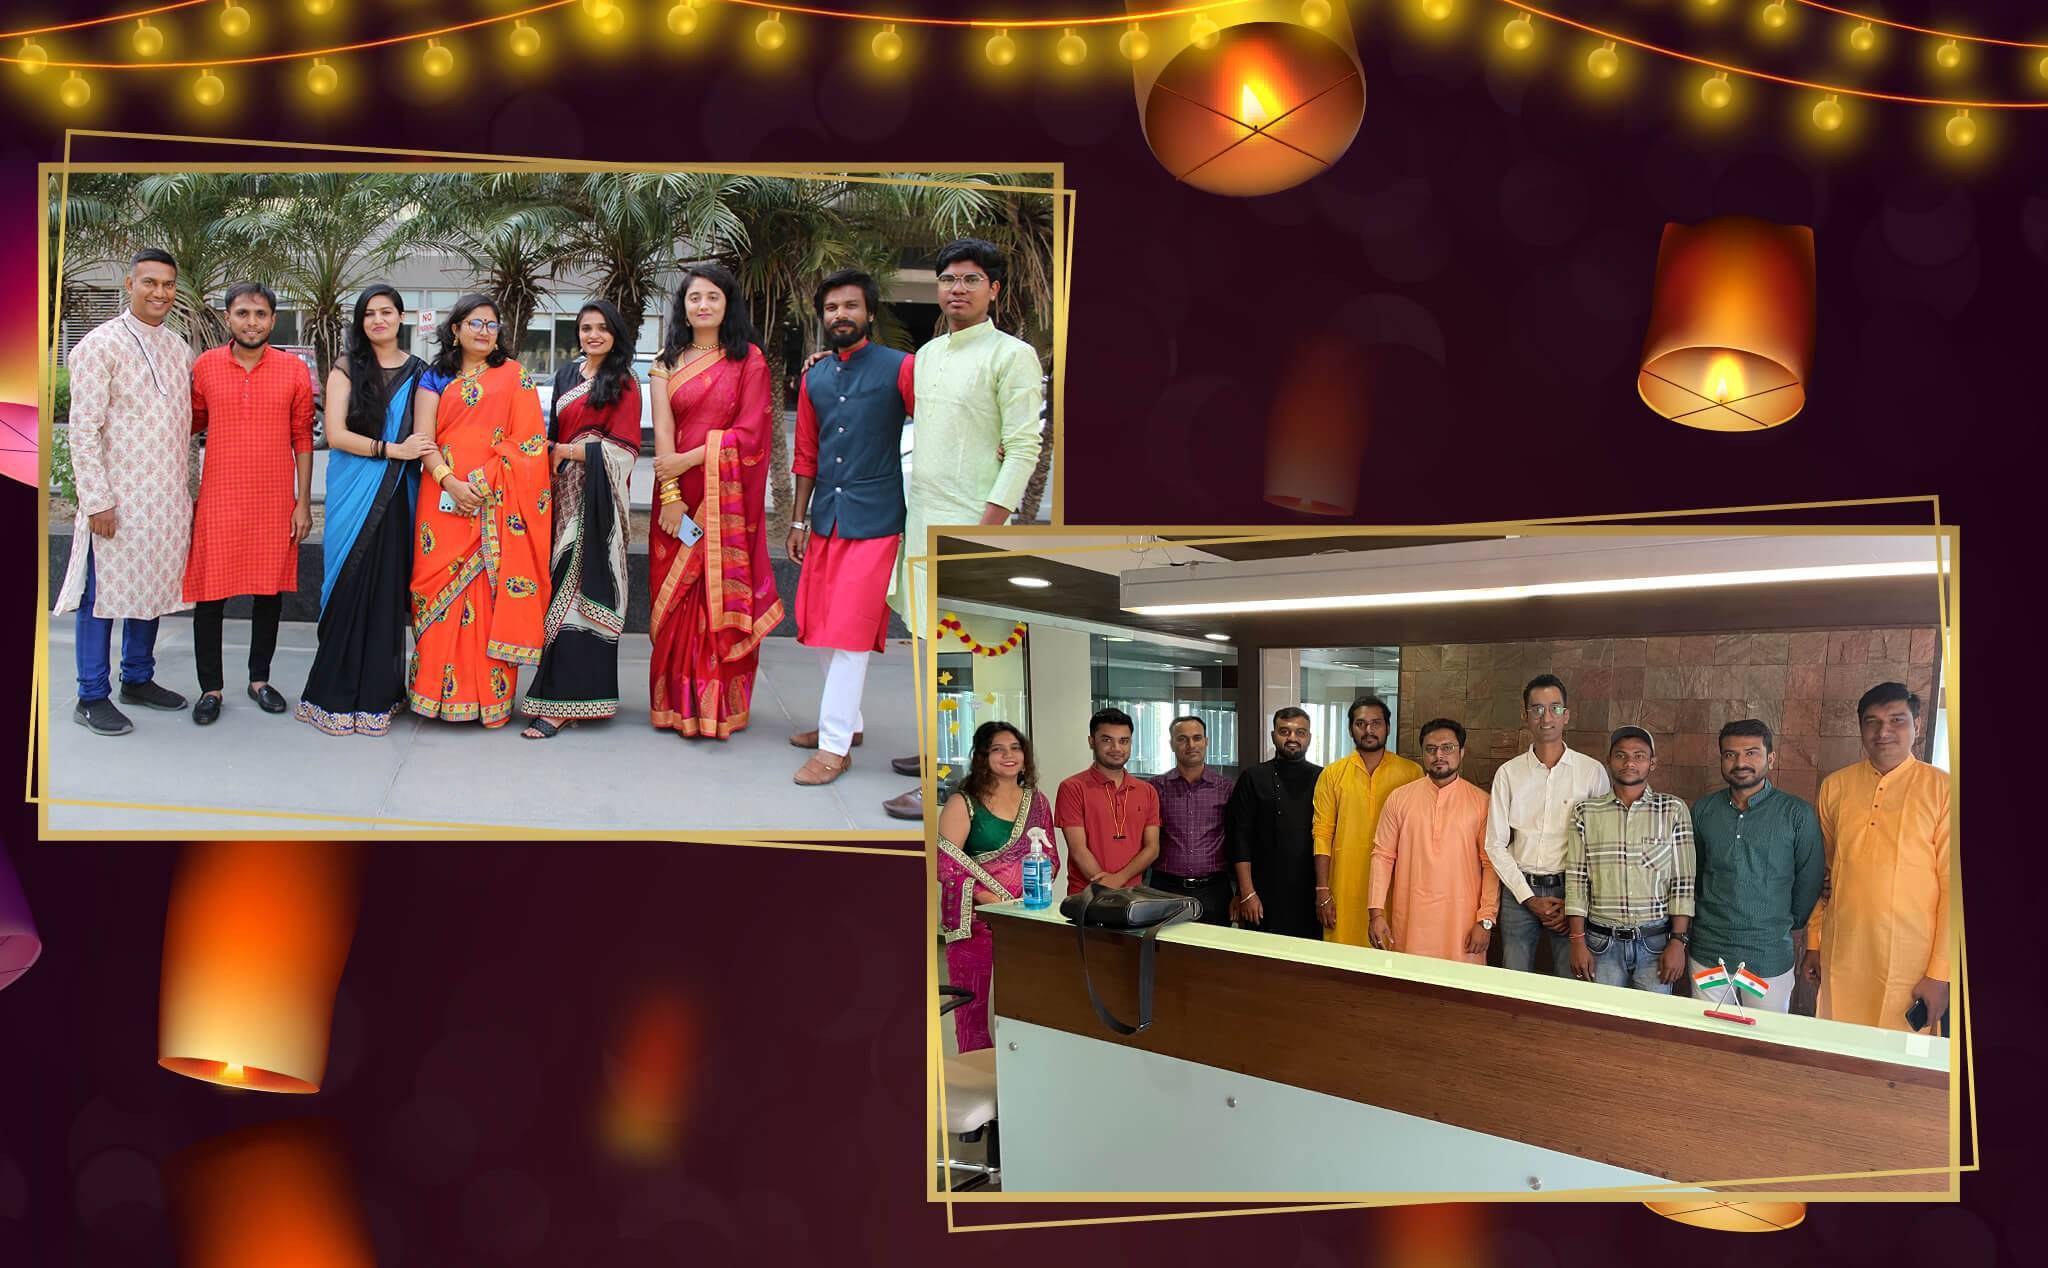 Silicon IT Hub company celebrated Diwali with a spectacular event, illuminating the workplace with joy, and fostering a spirit of togetherness among employees.